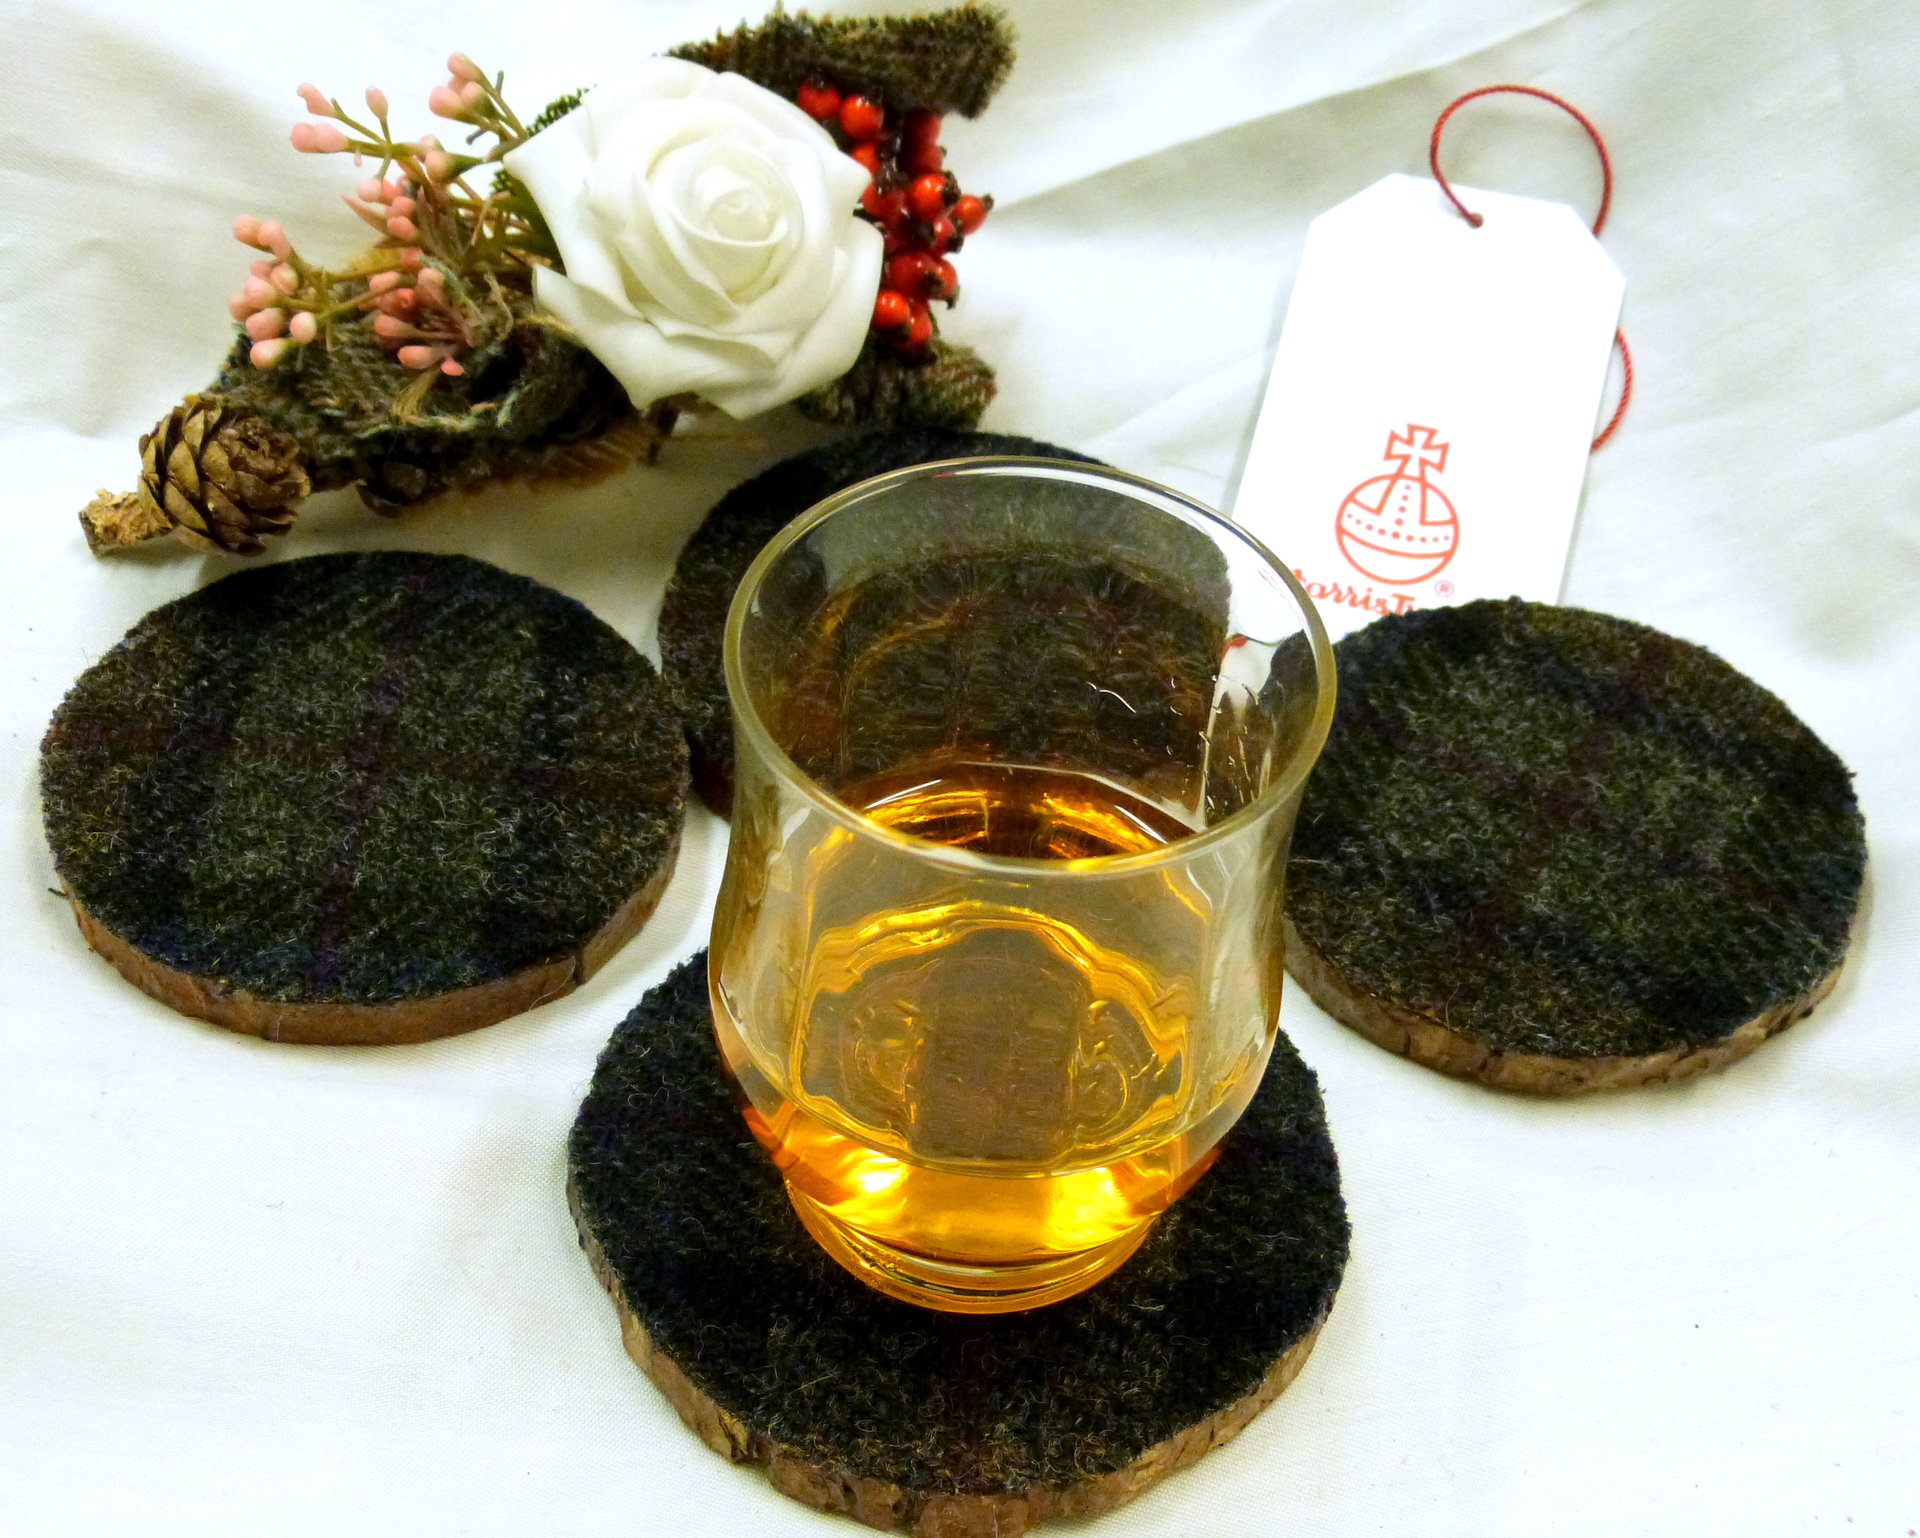 Wood slice Harris Tweed drinks coasters " Black Cuillins " set of four made in Scotland a unique handmade gift